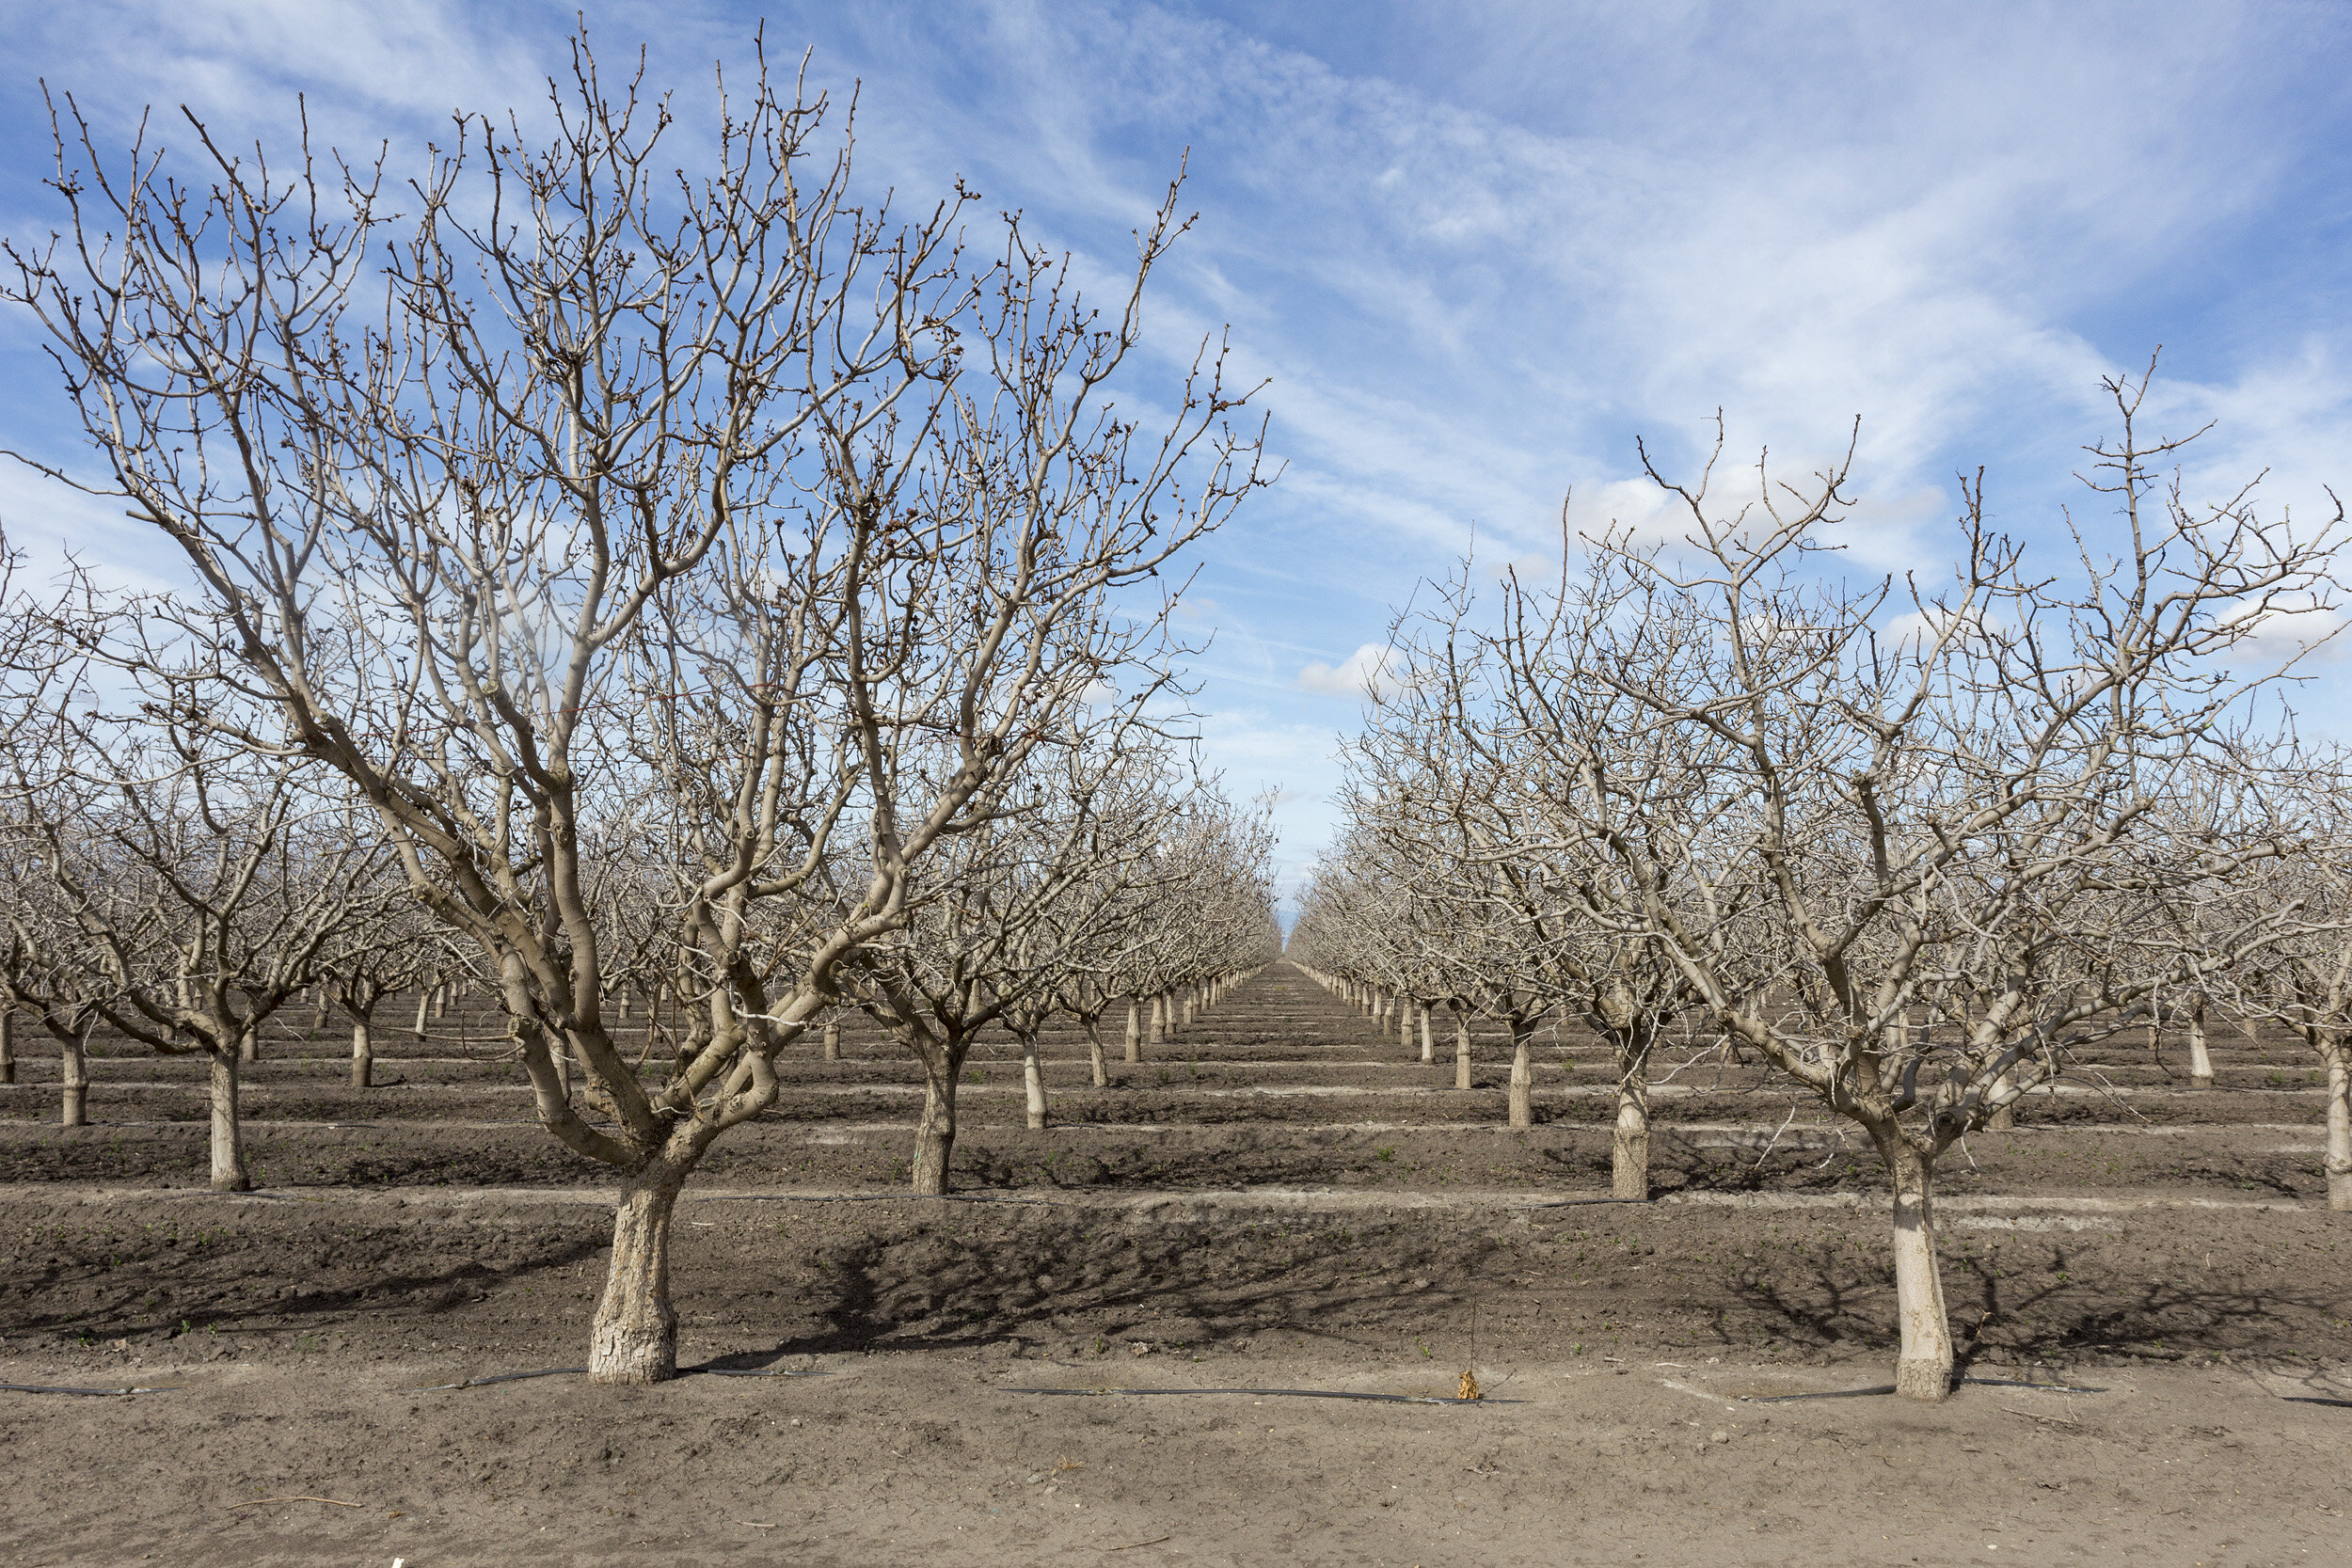  San Joaquin Valley Orchard, Study #2. Buttonwillow, CA. 2019 (35°23'33.234" N 119°28'3.462" W)